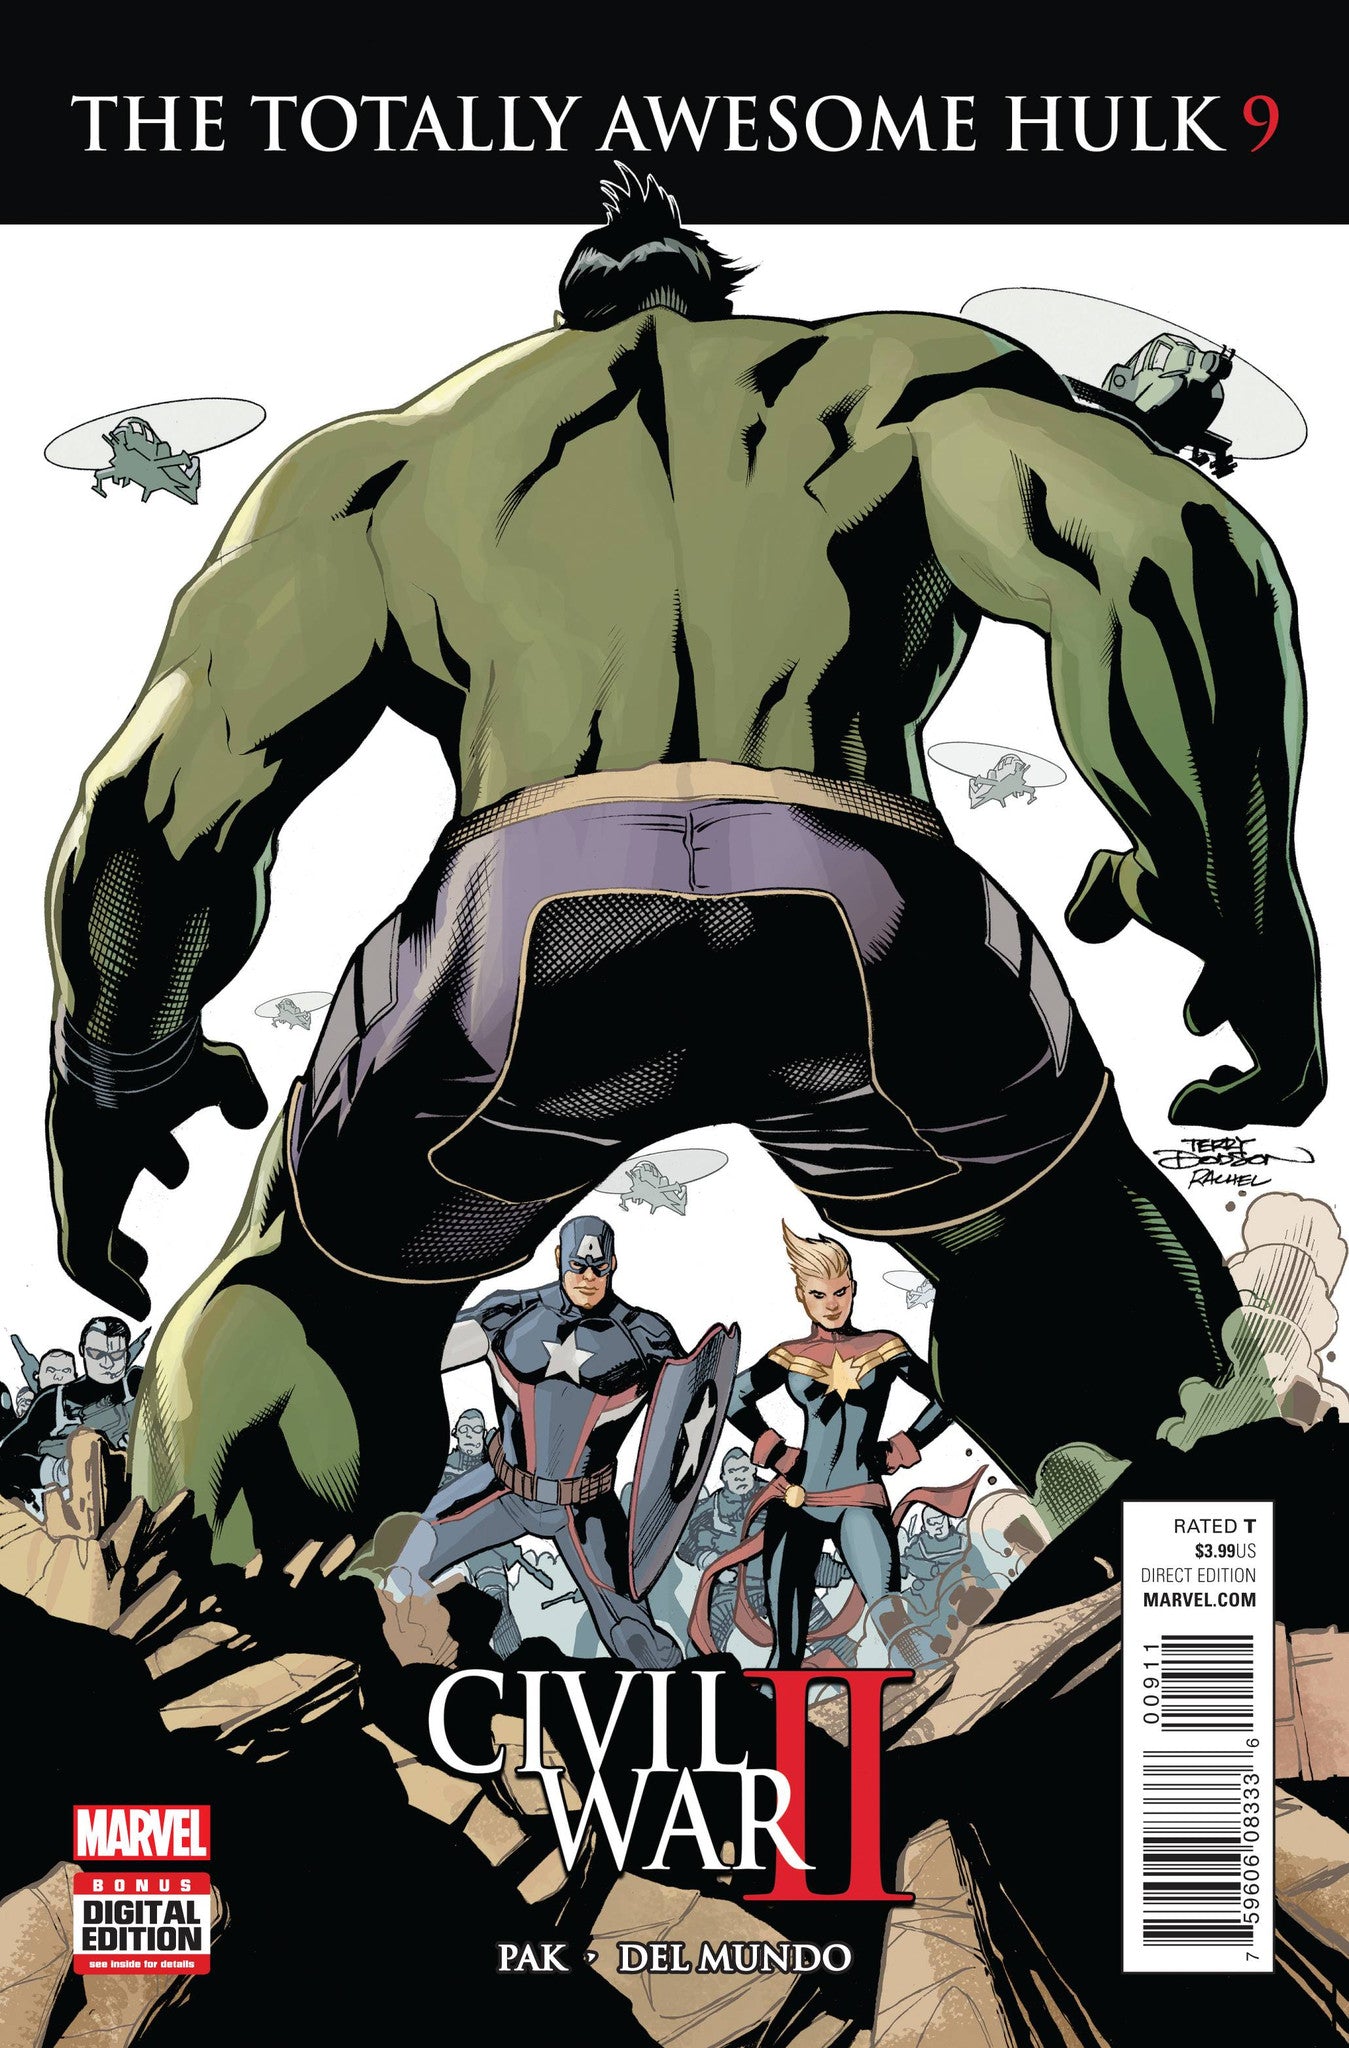 TOTALLY AWESOME HULK #9 CW2 COVER